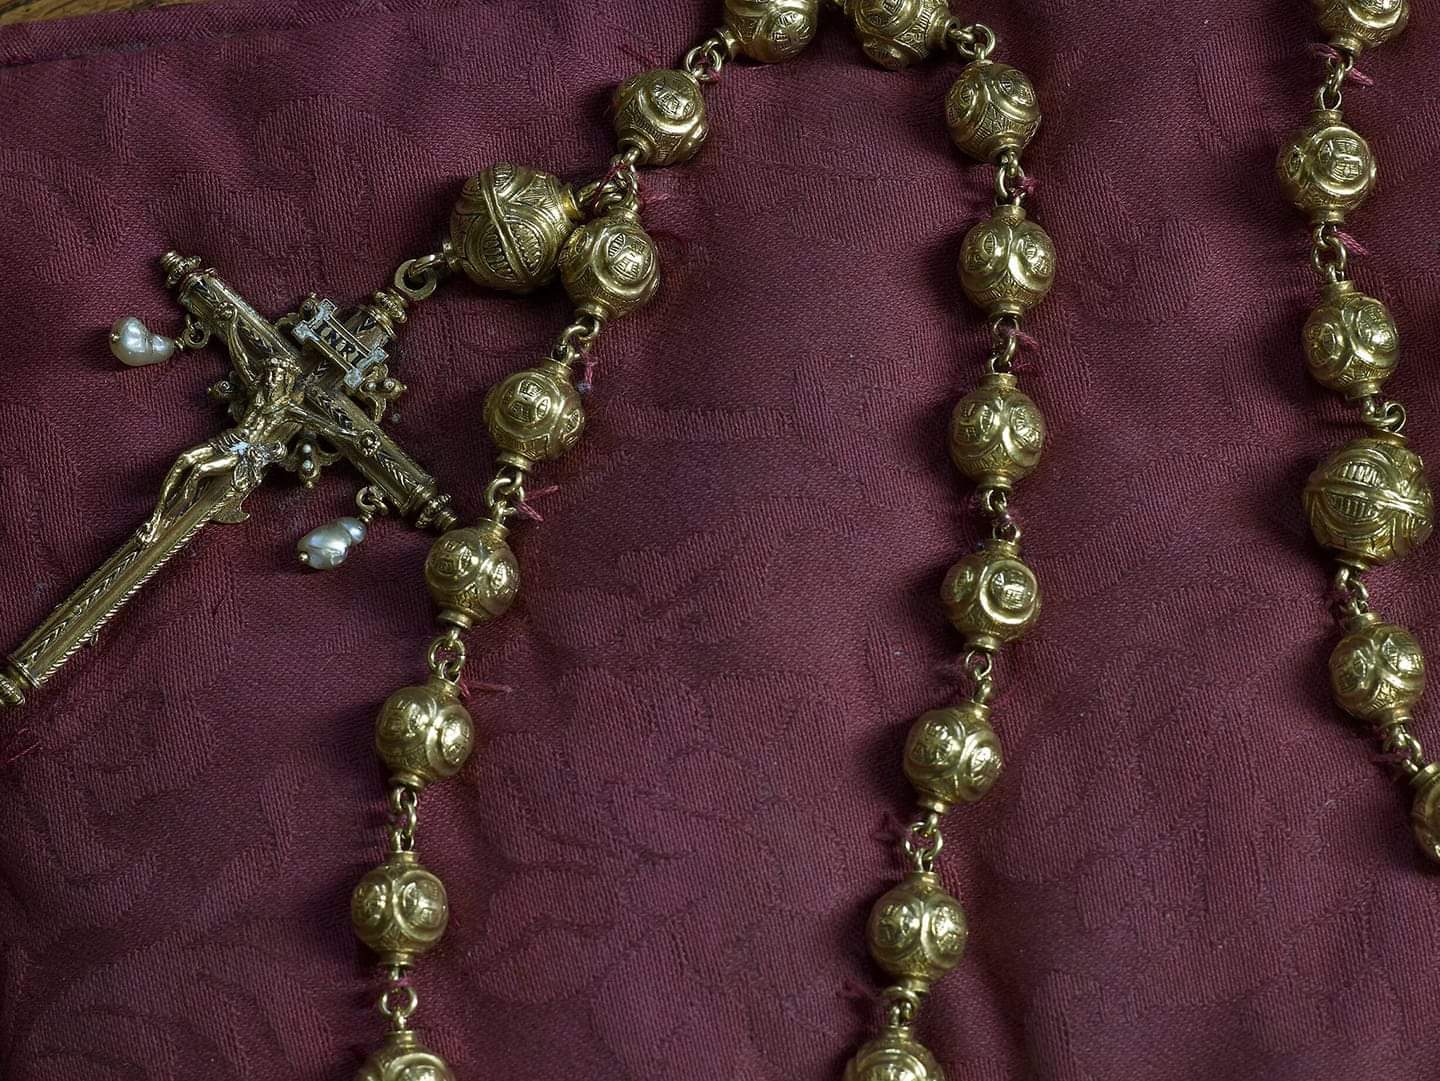 The gold rosary beads carried by Mary, Queen of Scots to her execution have been stolen 